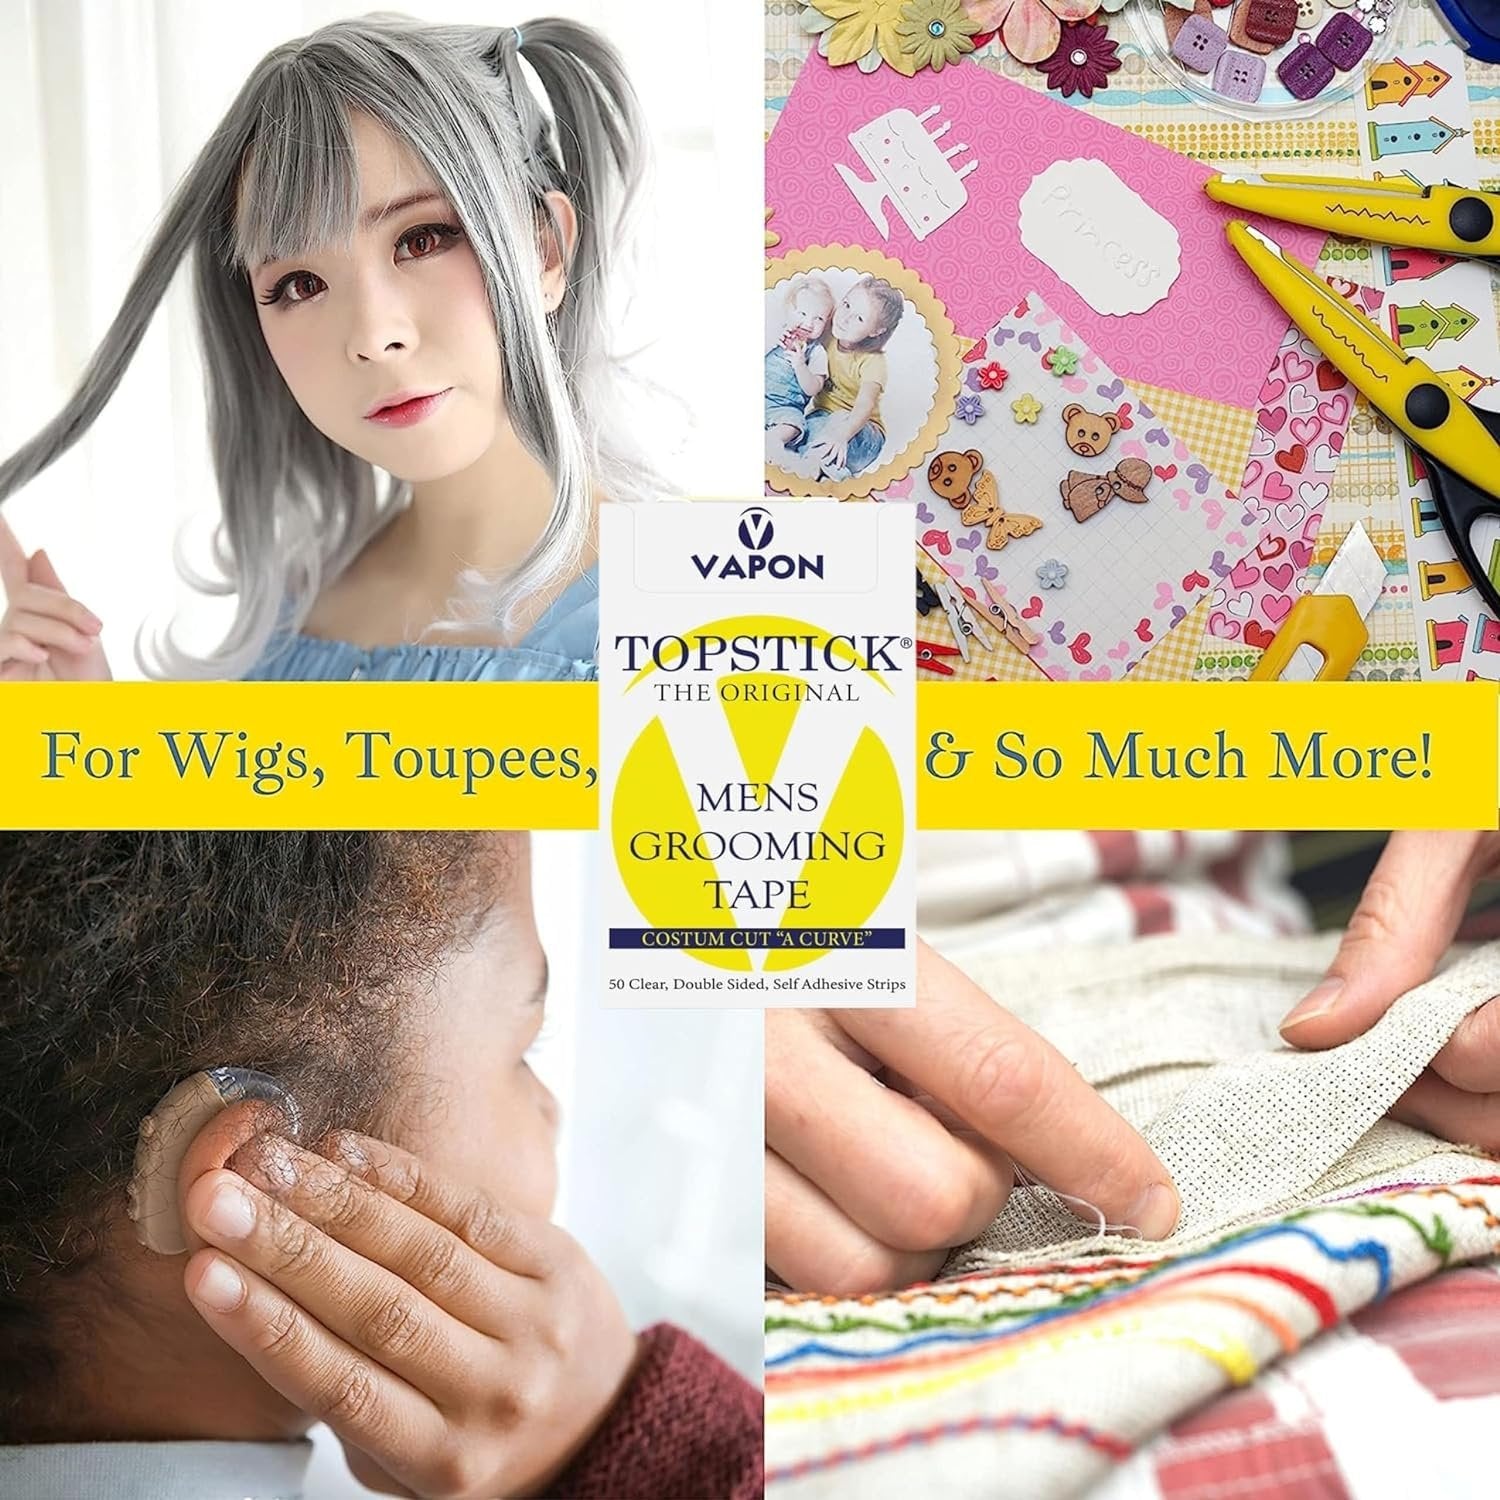 Vapon Topstick Custom Cut A Curve - Style & Confidence Tape in Hair Extensions - 6 Pack, 300 Double-Sided Strips Lace Tape for Wigs & Multi-Purpose Key Chain